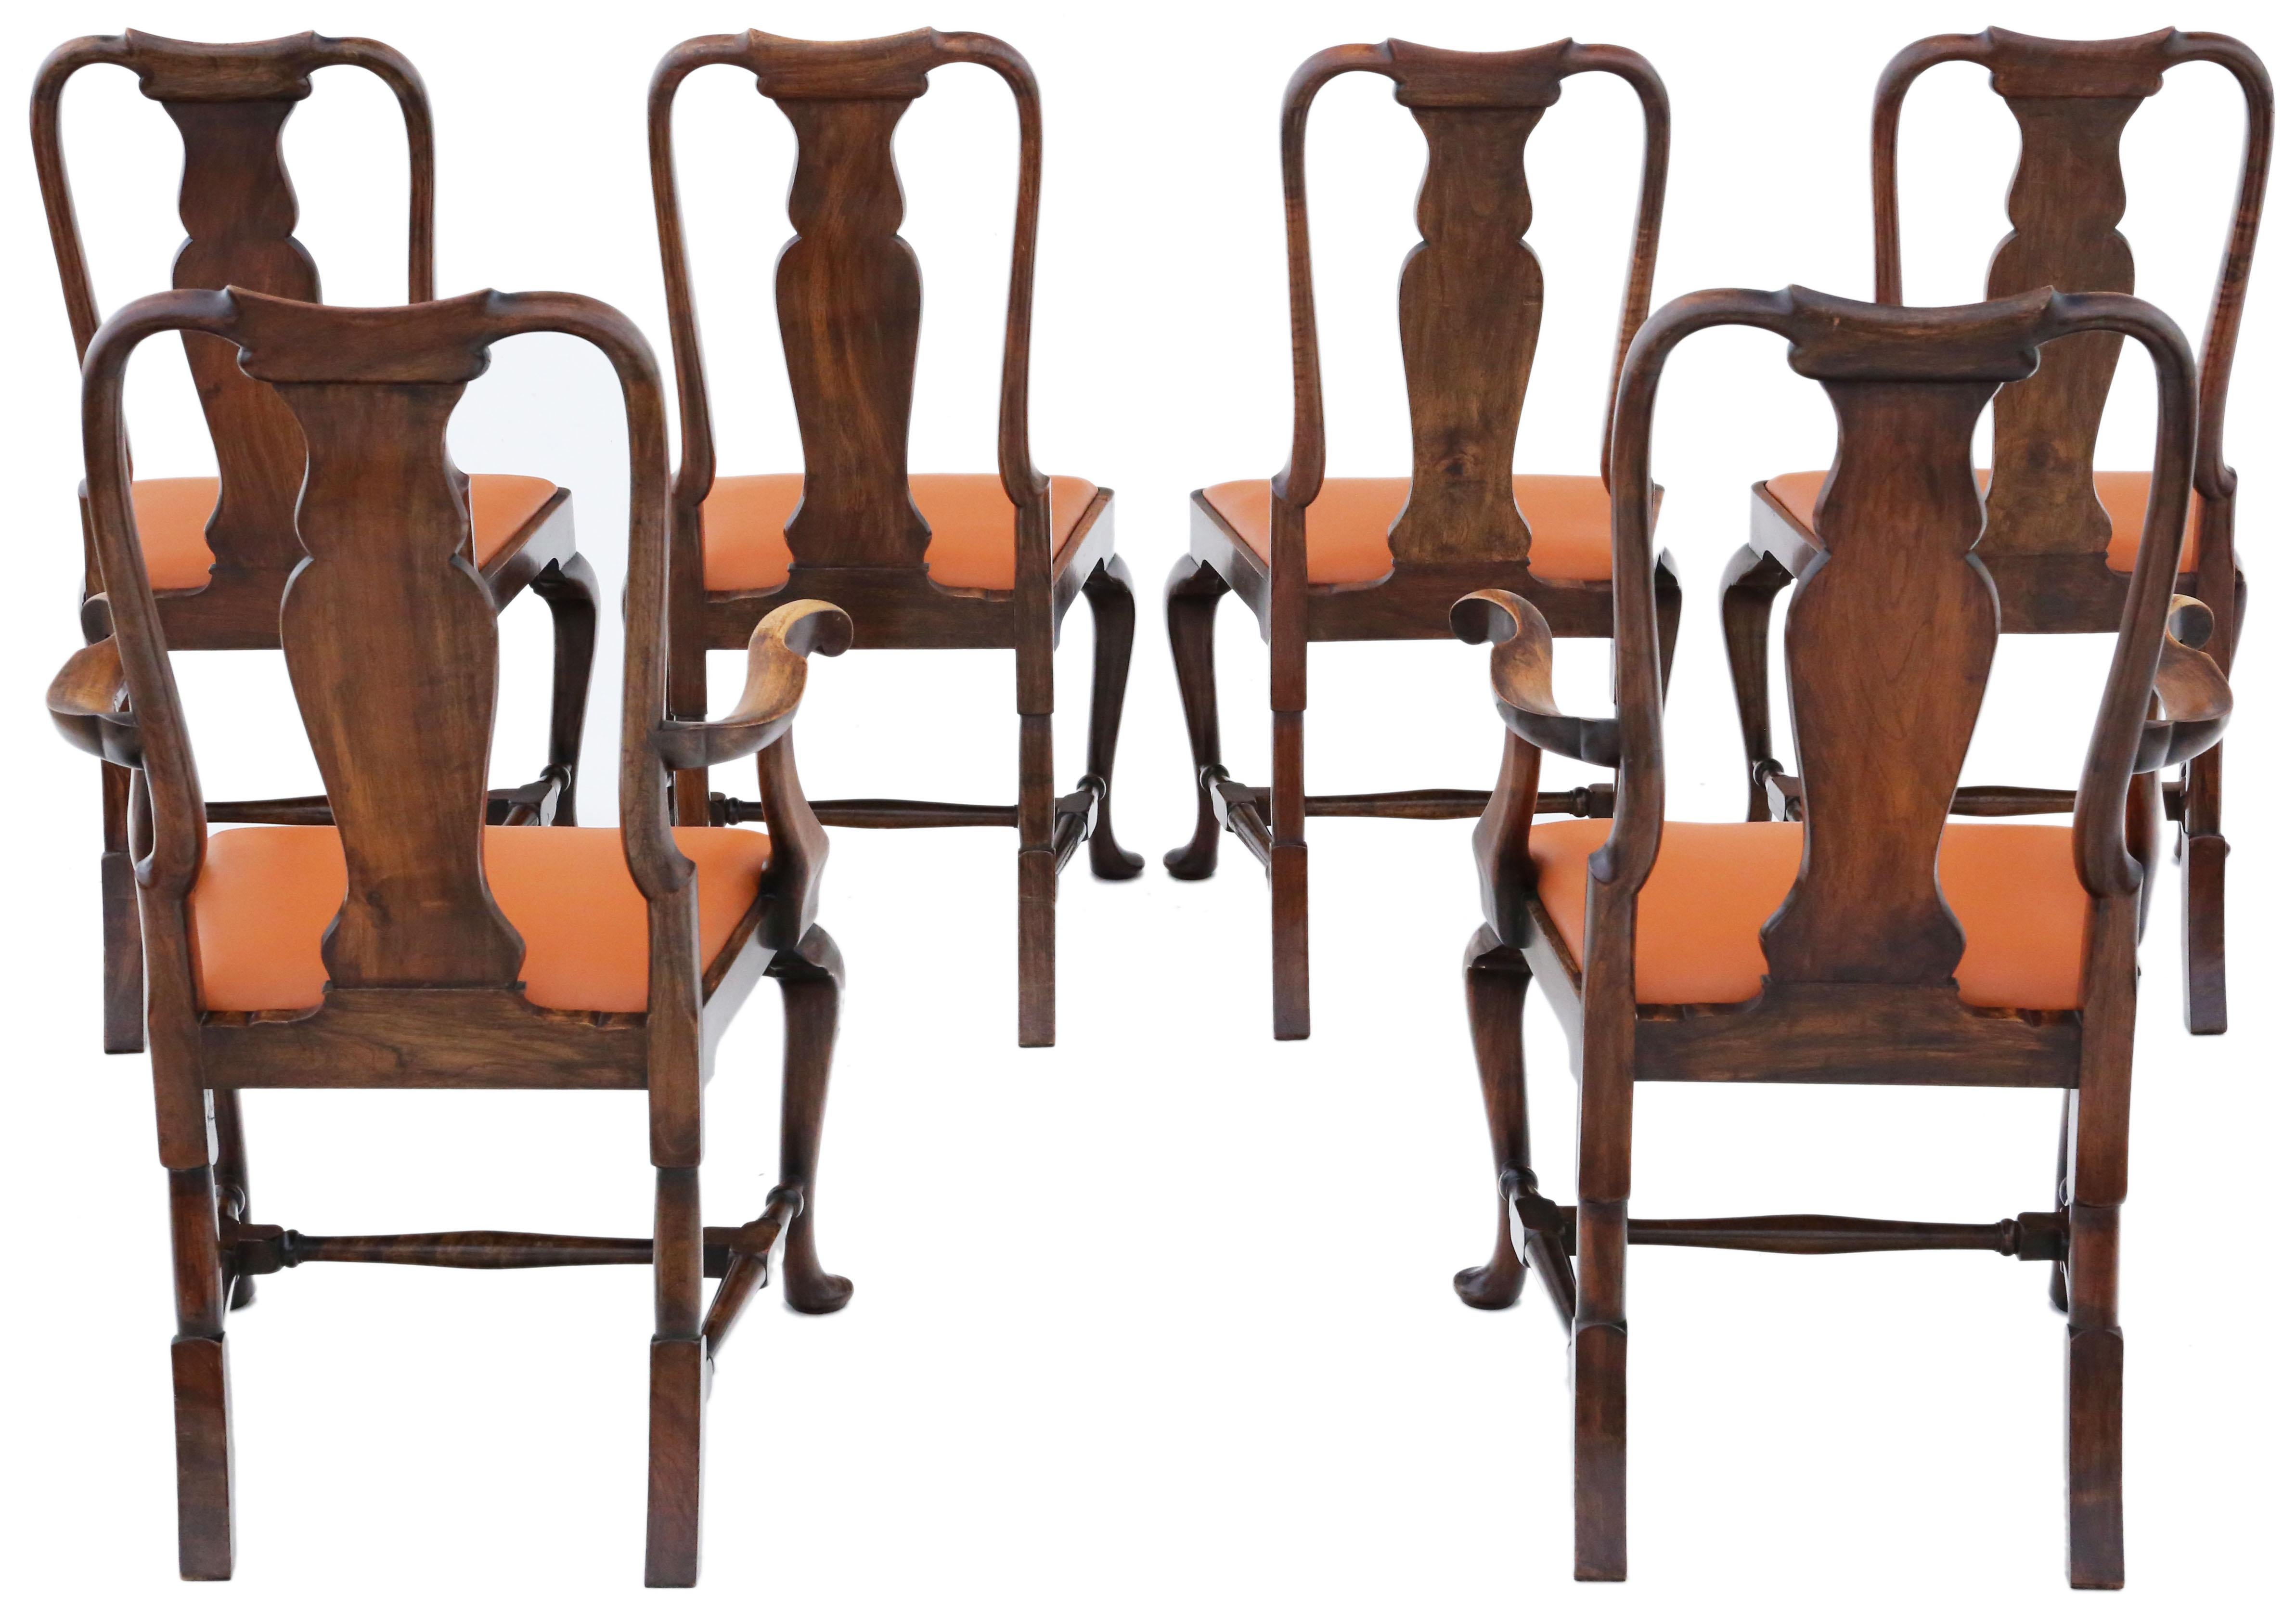 Antique Queen Anne Revival Burr Walnut Dining Chairs Set of 6 (Circa 1915)

Solid and sturdy construction with no loose joints or woodworm.

Recently upholstered in tan leather.

Dimensions:

Chair: 59cmW x 62cmD x 105cmH (47cmH seat)
Carver: 65cmW